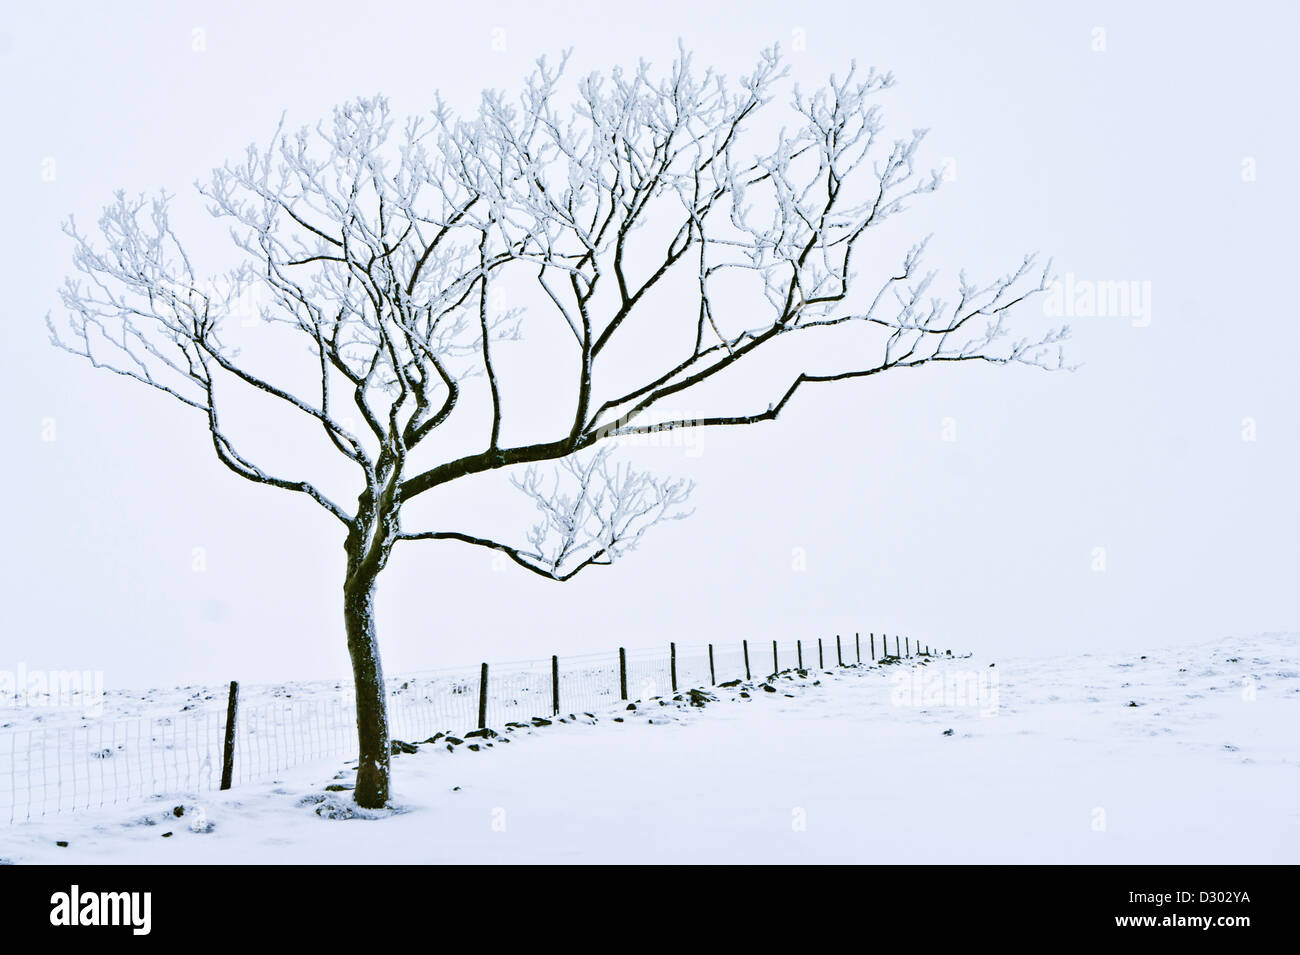 Winter landscape Snow covered tree against a wire fence near Rushup Edge Derbyshire Peak district national park England UK GB Europe Stock Photo